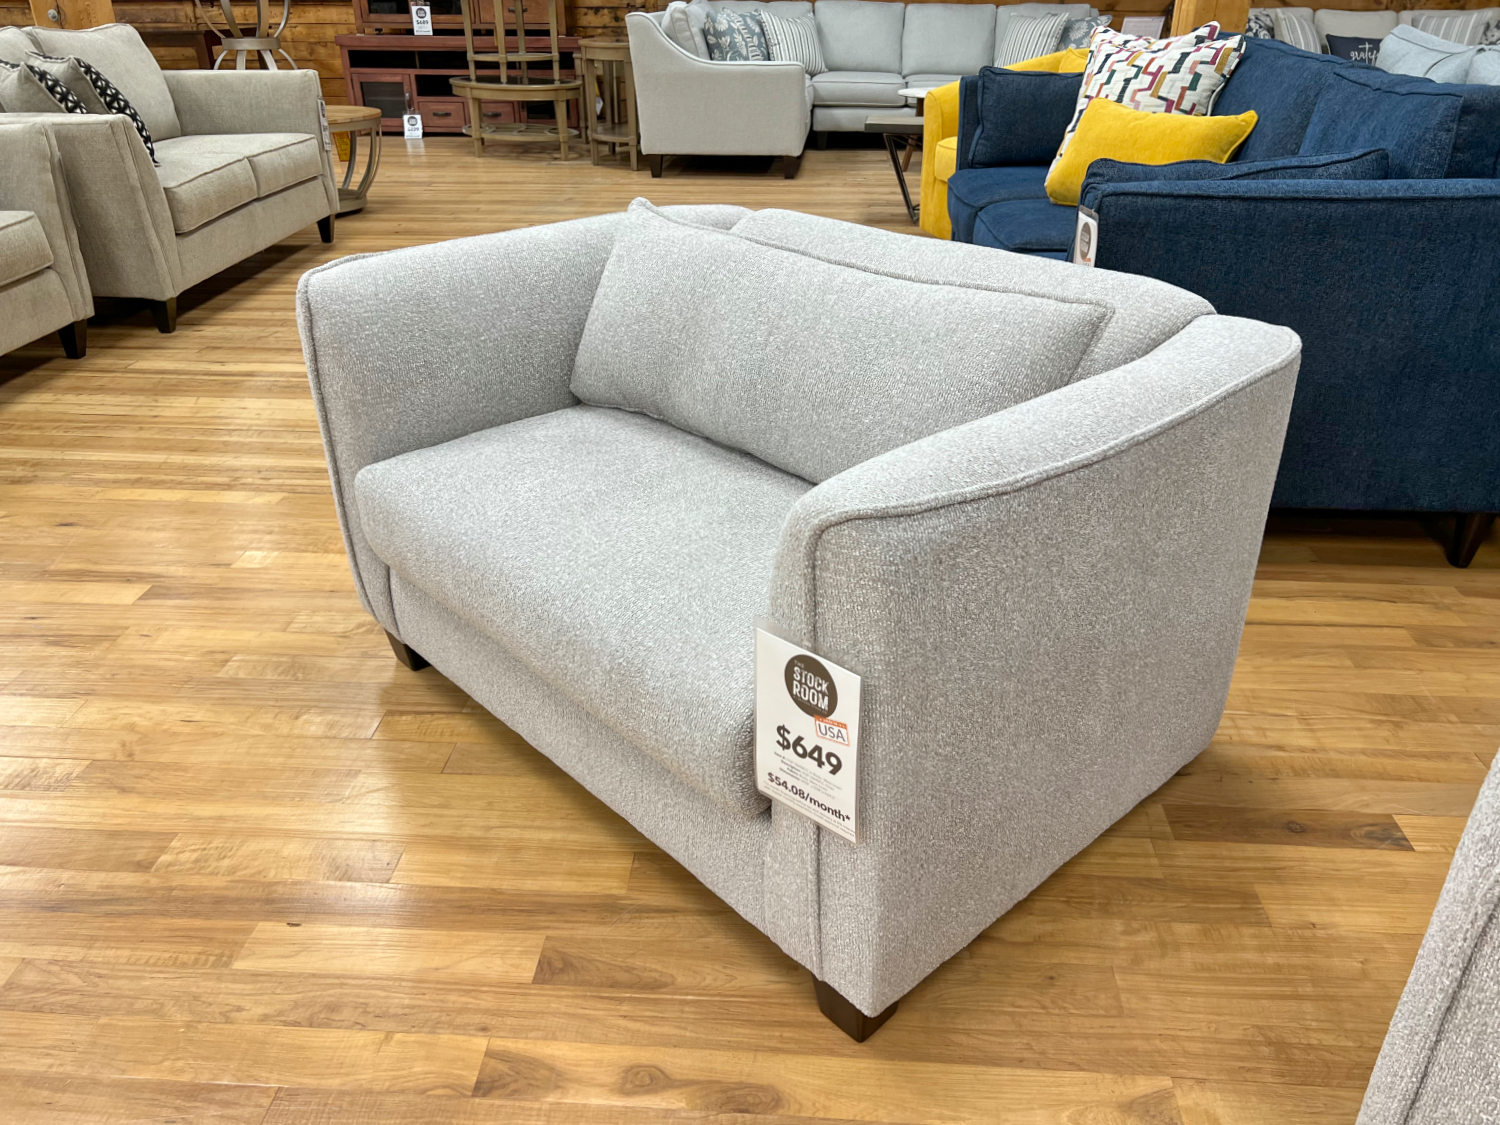 MCM armchair in grey upholstery at the stock room discount furniture factory in rockford, il